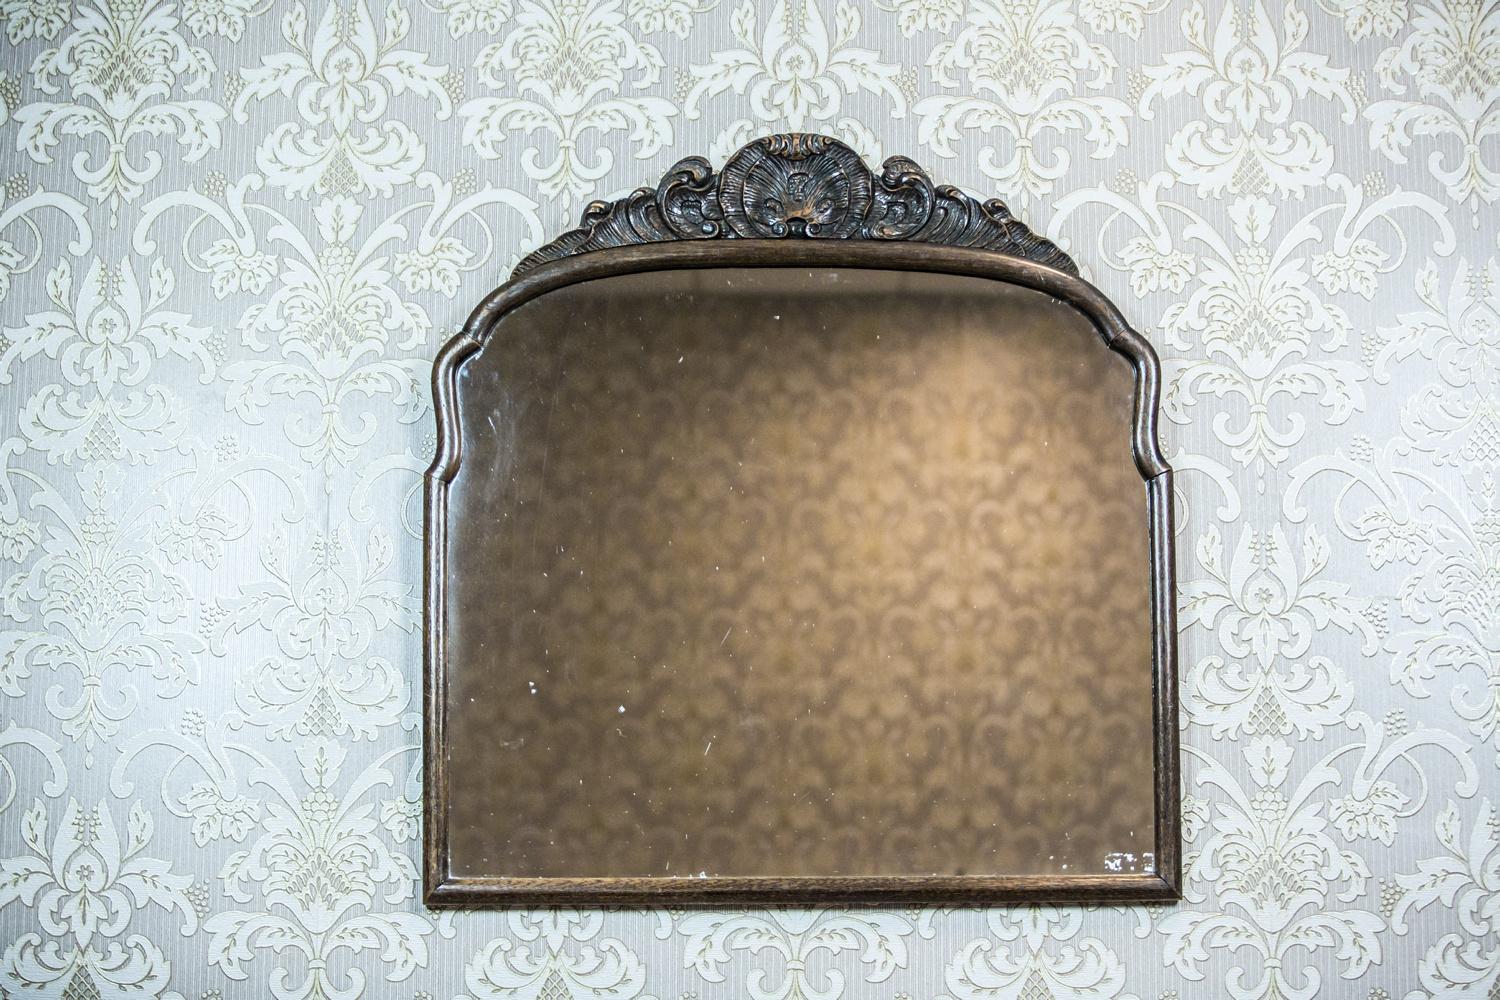 We present you this mirror, circa the late 19th century, closed in a wooden frame in the Neo-Rococo style.
The shape of the mirror is similar to a square. The frame is topped with a semi-plastic decoration with the motif of a shell.

Presented